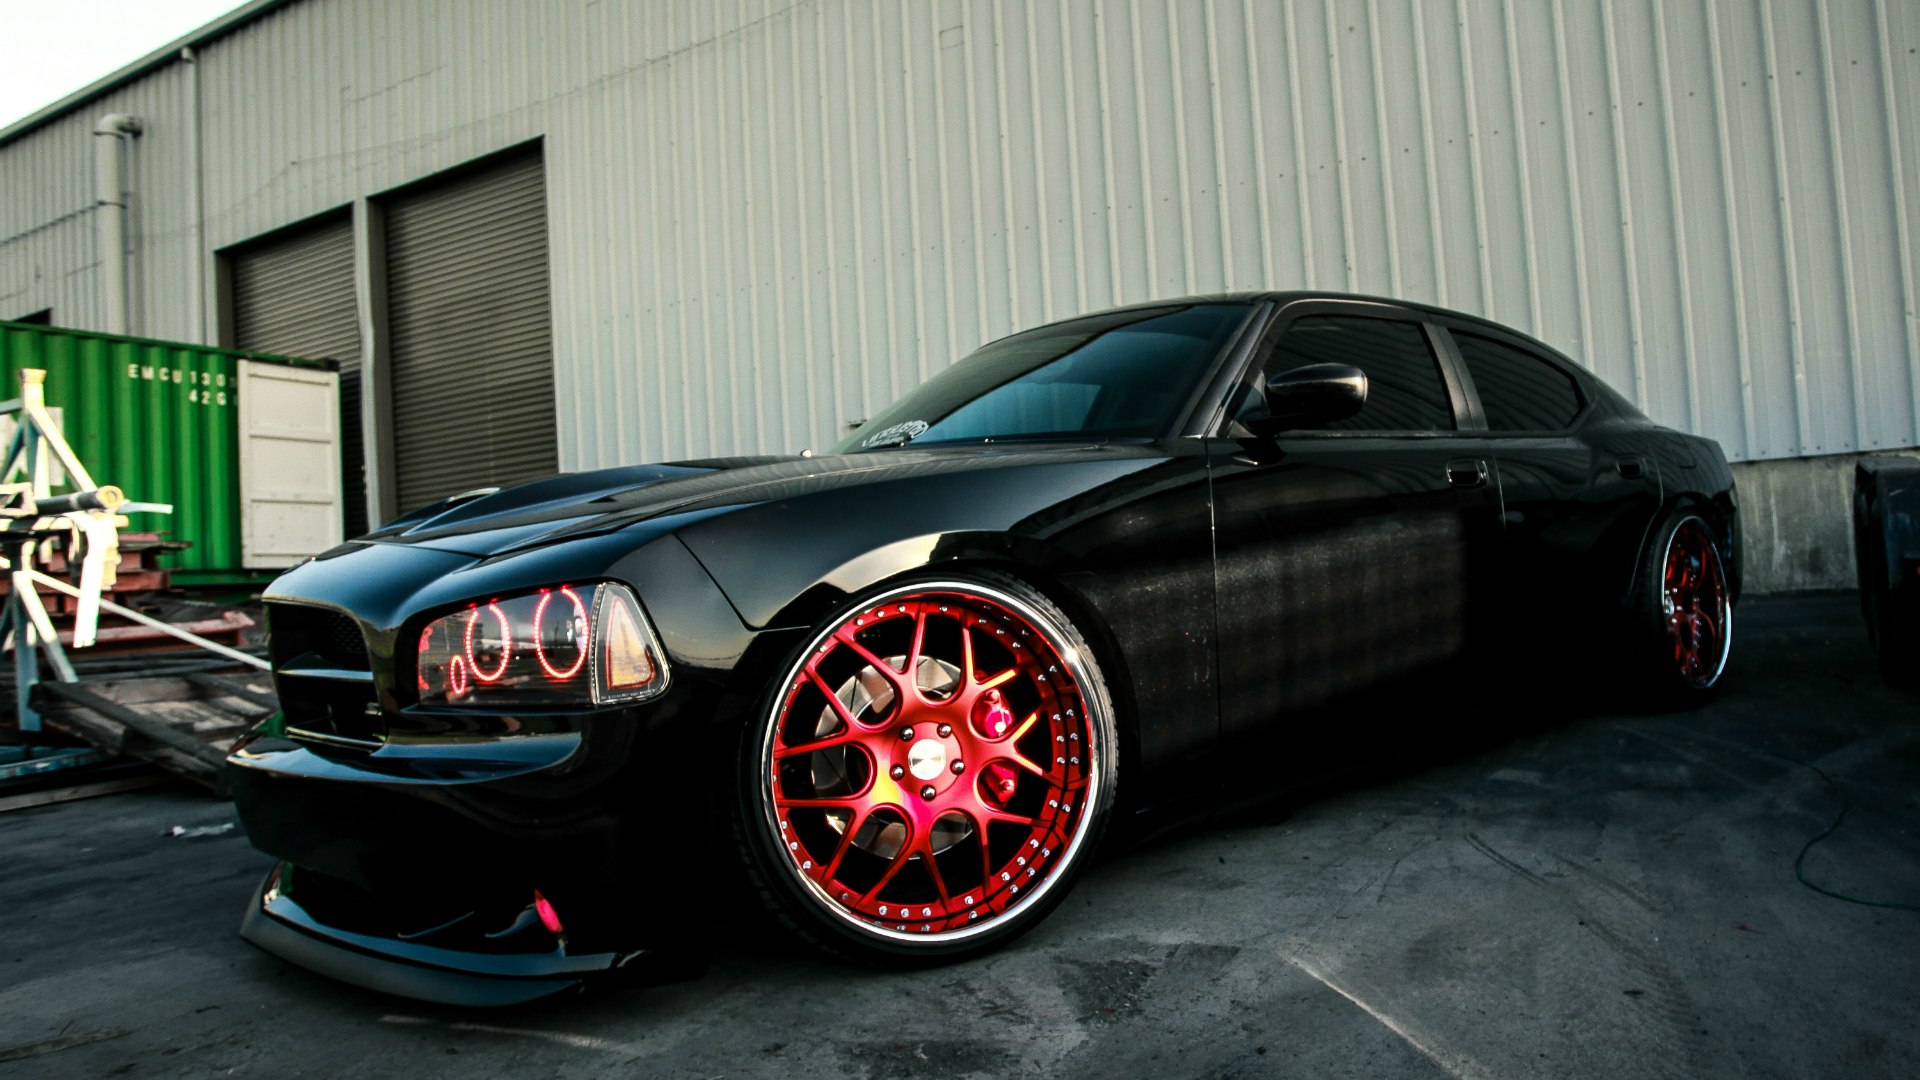 Charger srt8 Tuning